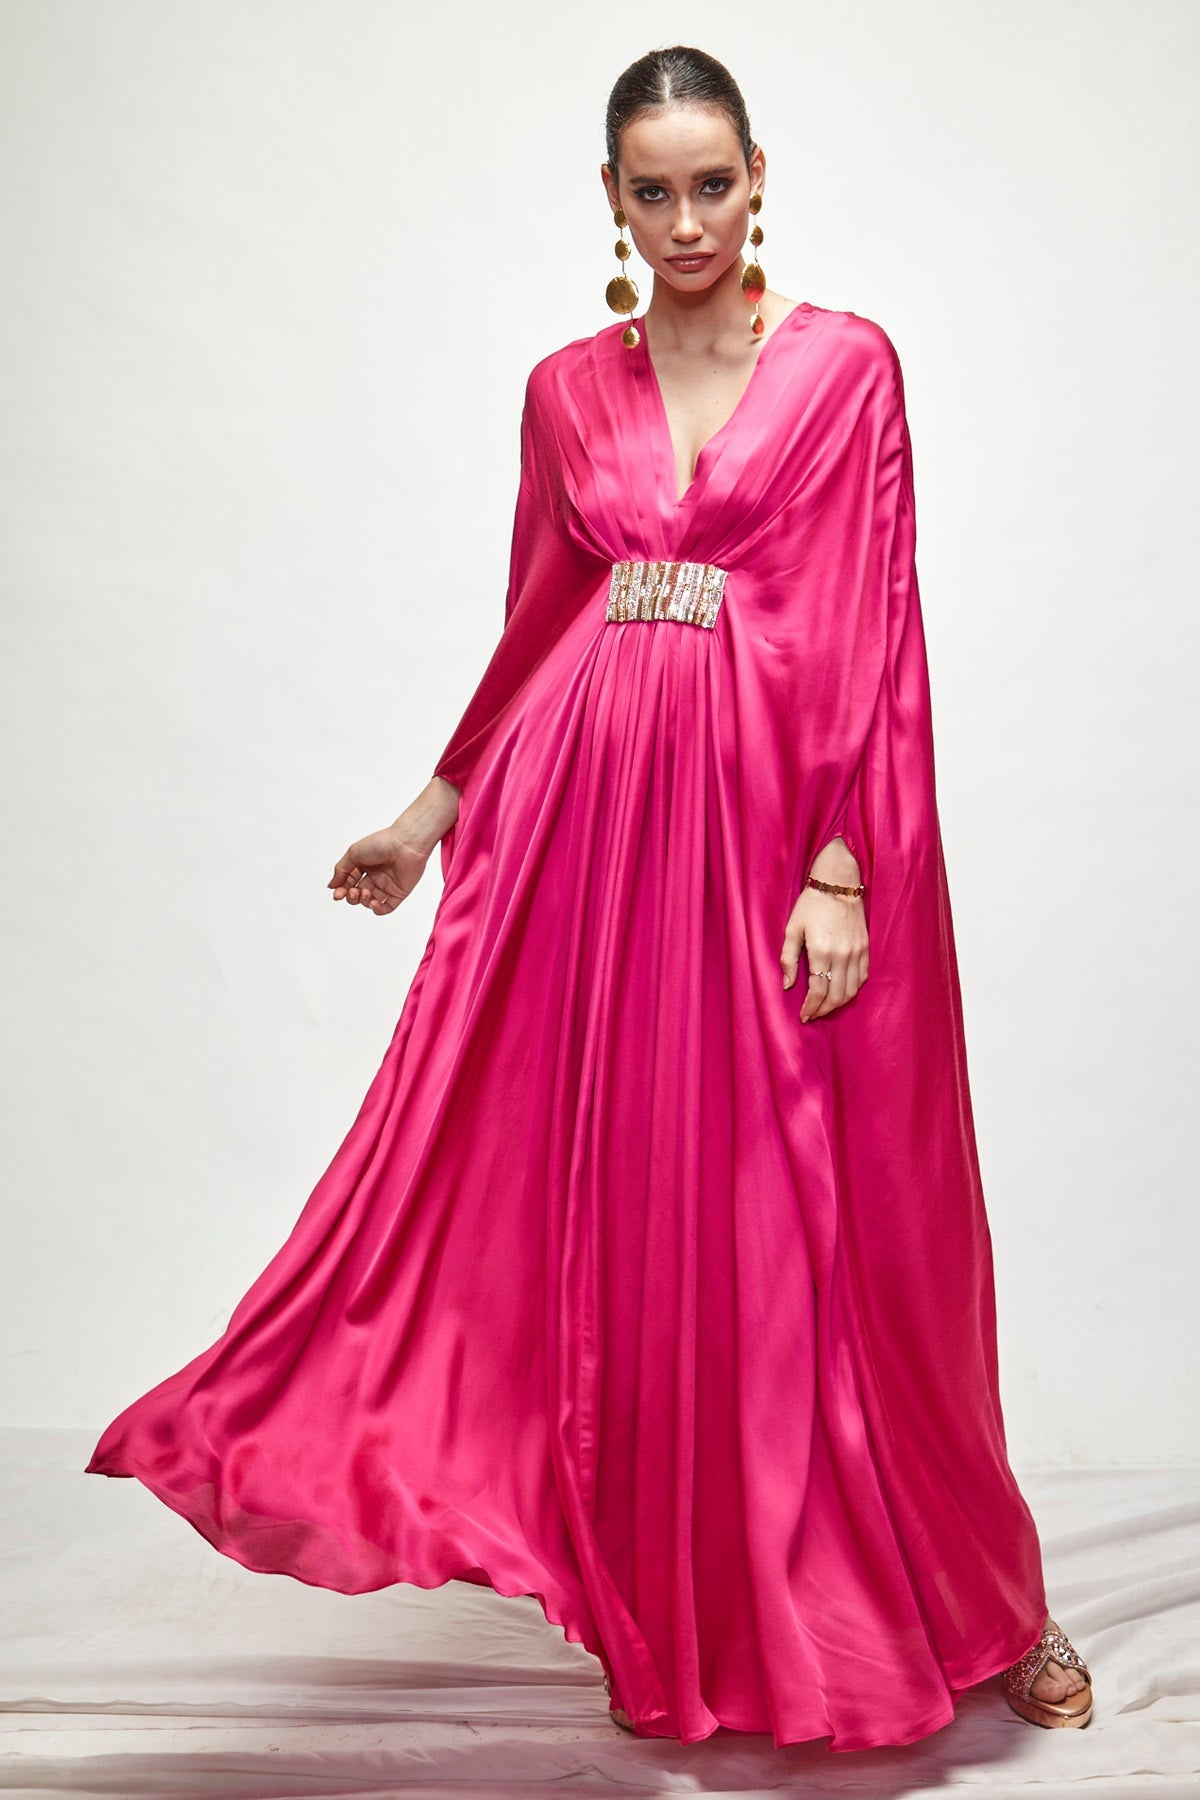 Designer Ranian Fuchsia silk kaftan with front pleat detailing and beads embroidery For women Online at ScrollnShops